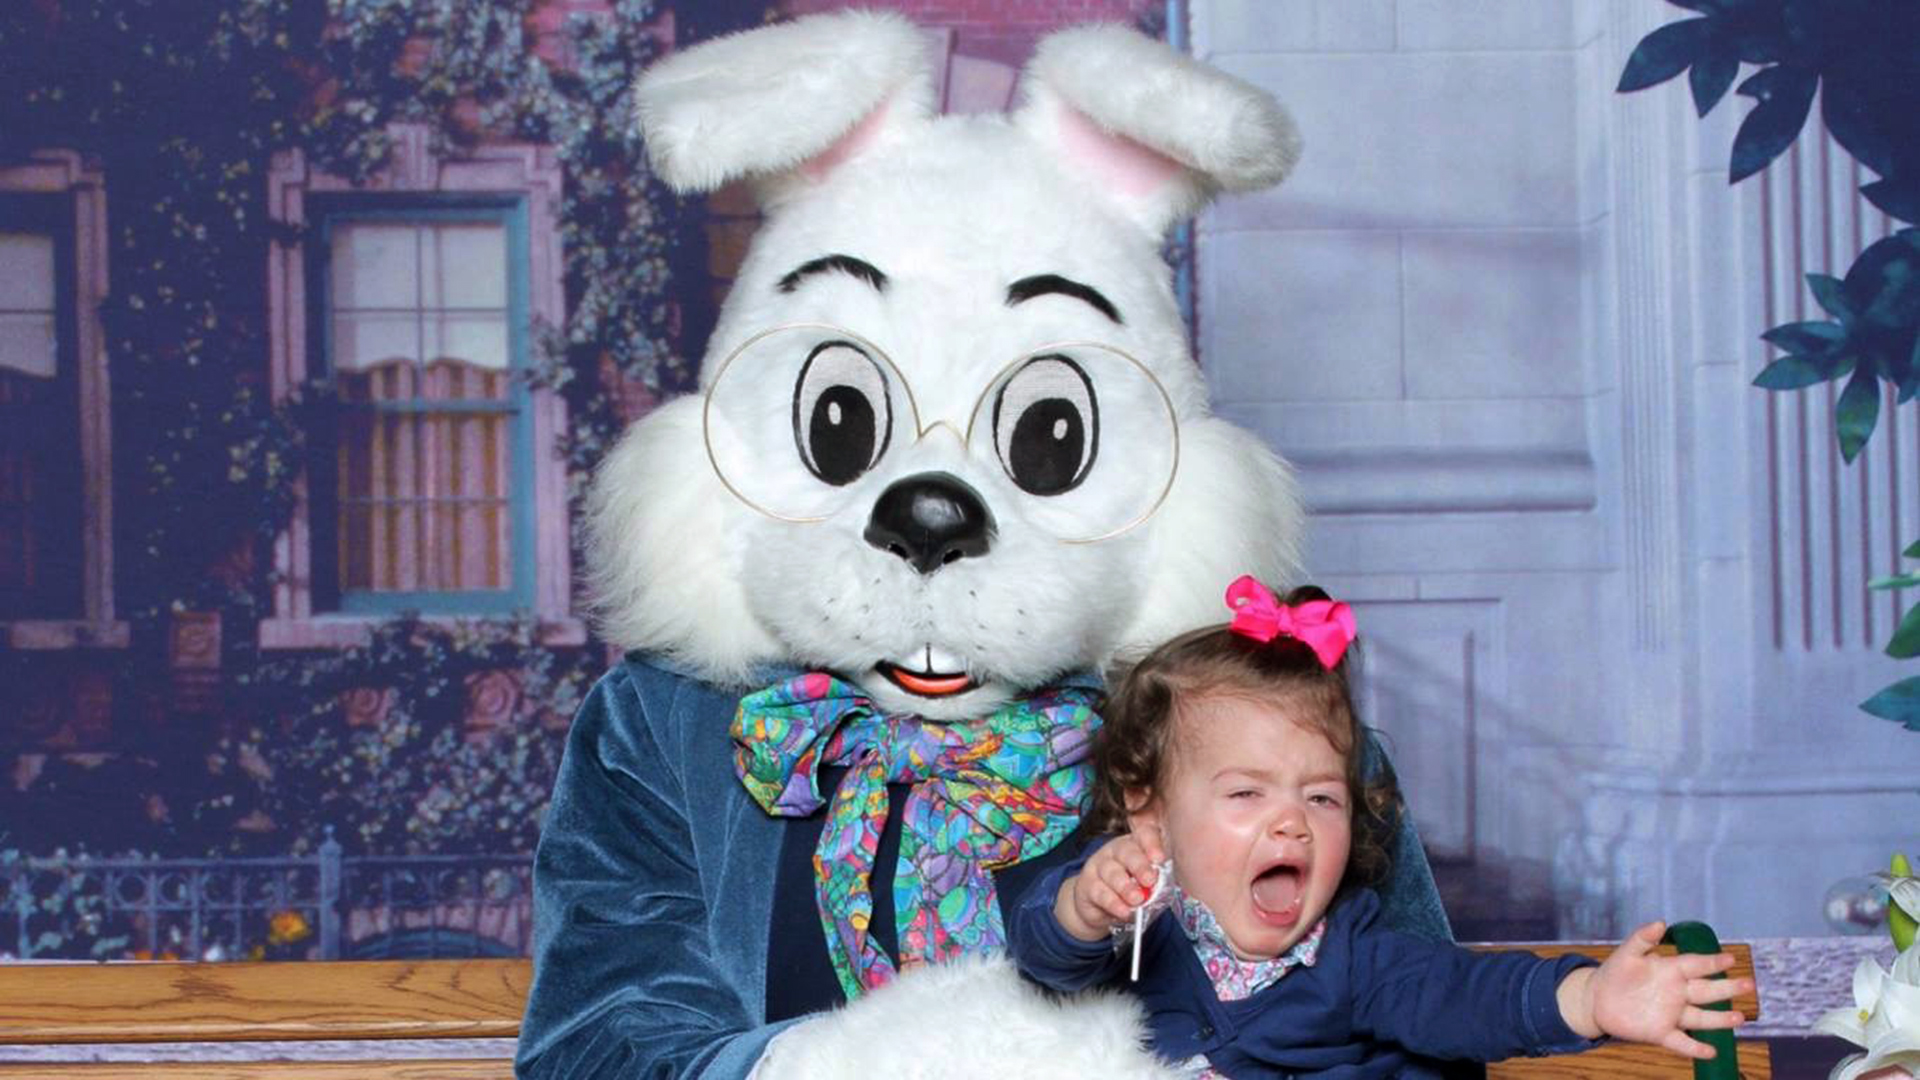 See funny photos of kids who are scared of the Easter Bunny - TODAY.com